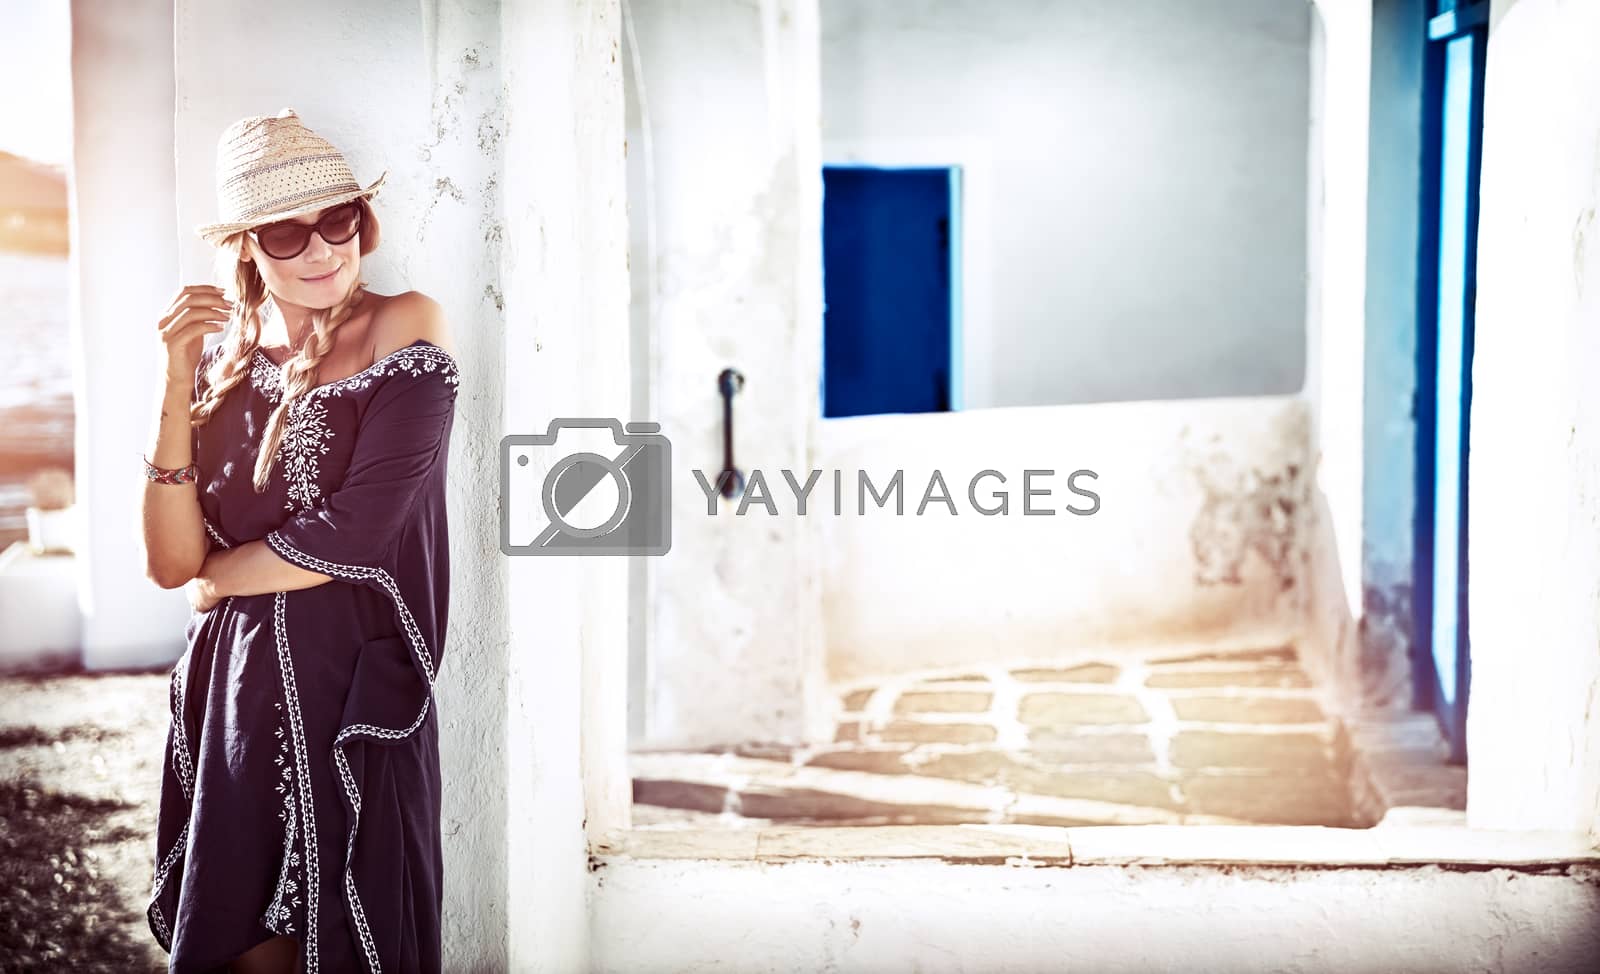 Royalty free image of Pretty girl in Greece by Anna_Omelchenko